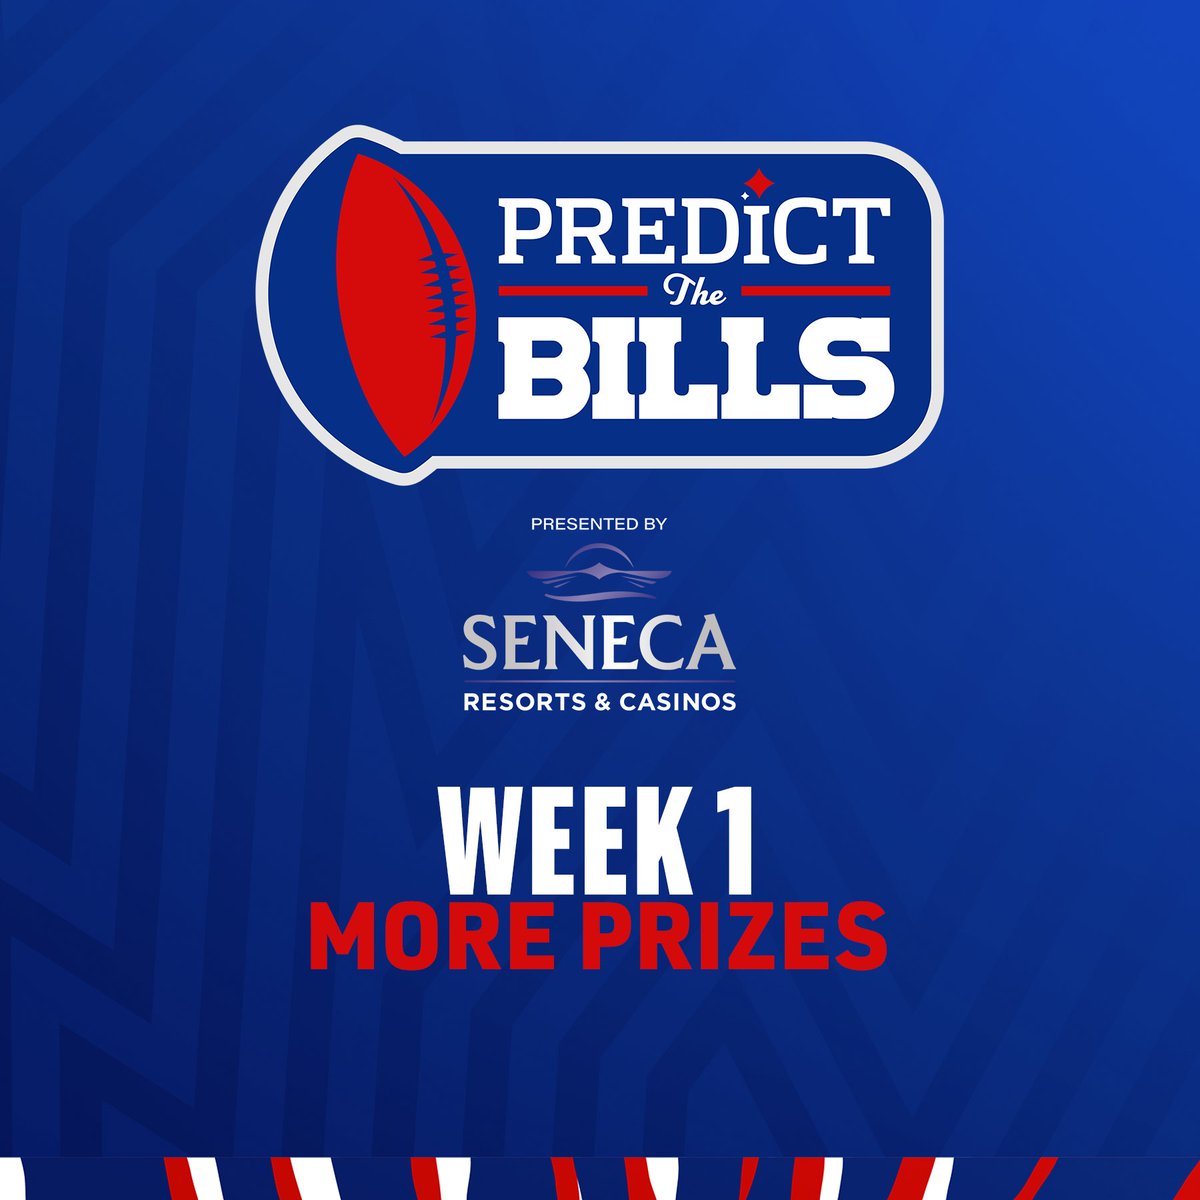 Buffalo Bills on Twitter "Predict the pick is back this season! Get